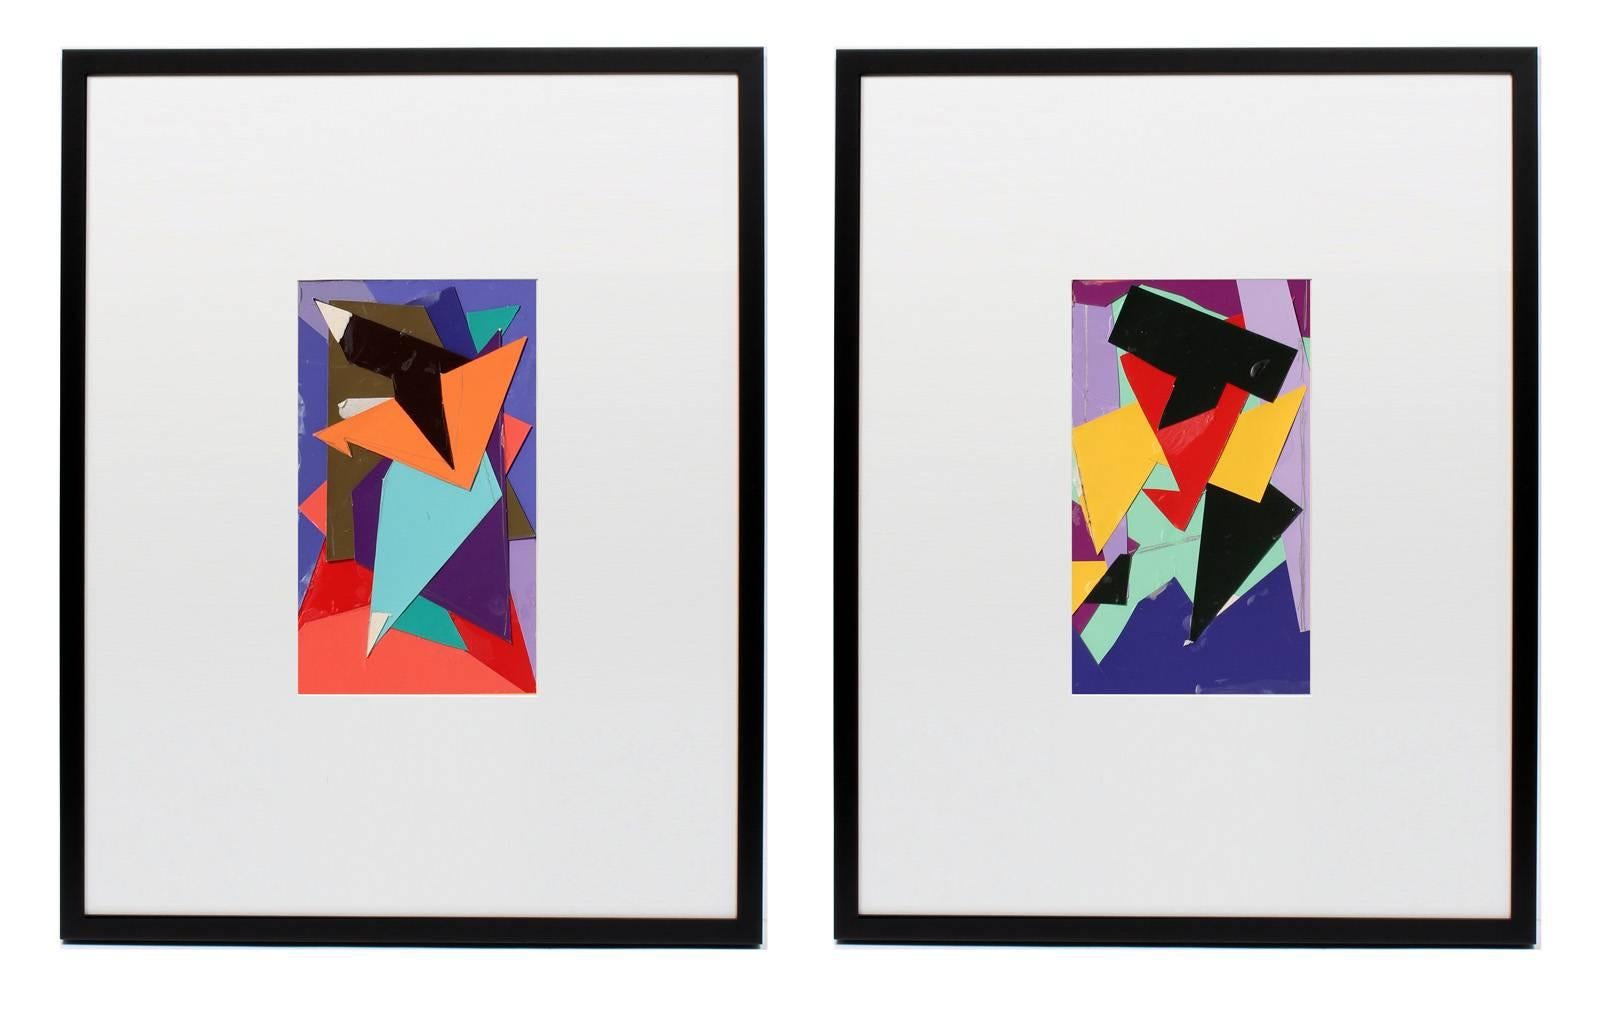 Pair of Cut Paper Collages - Mixed Media Art by Ricardo Morin